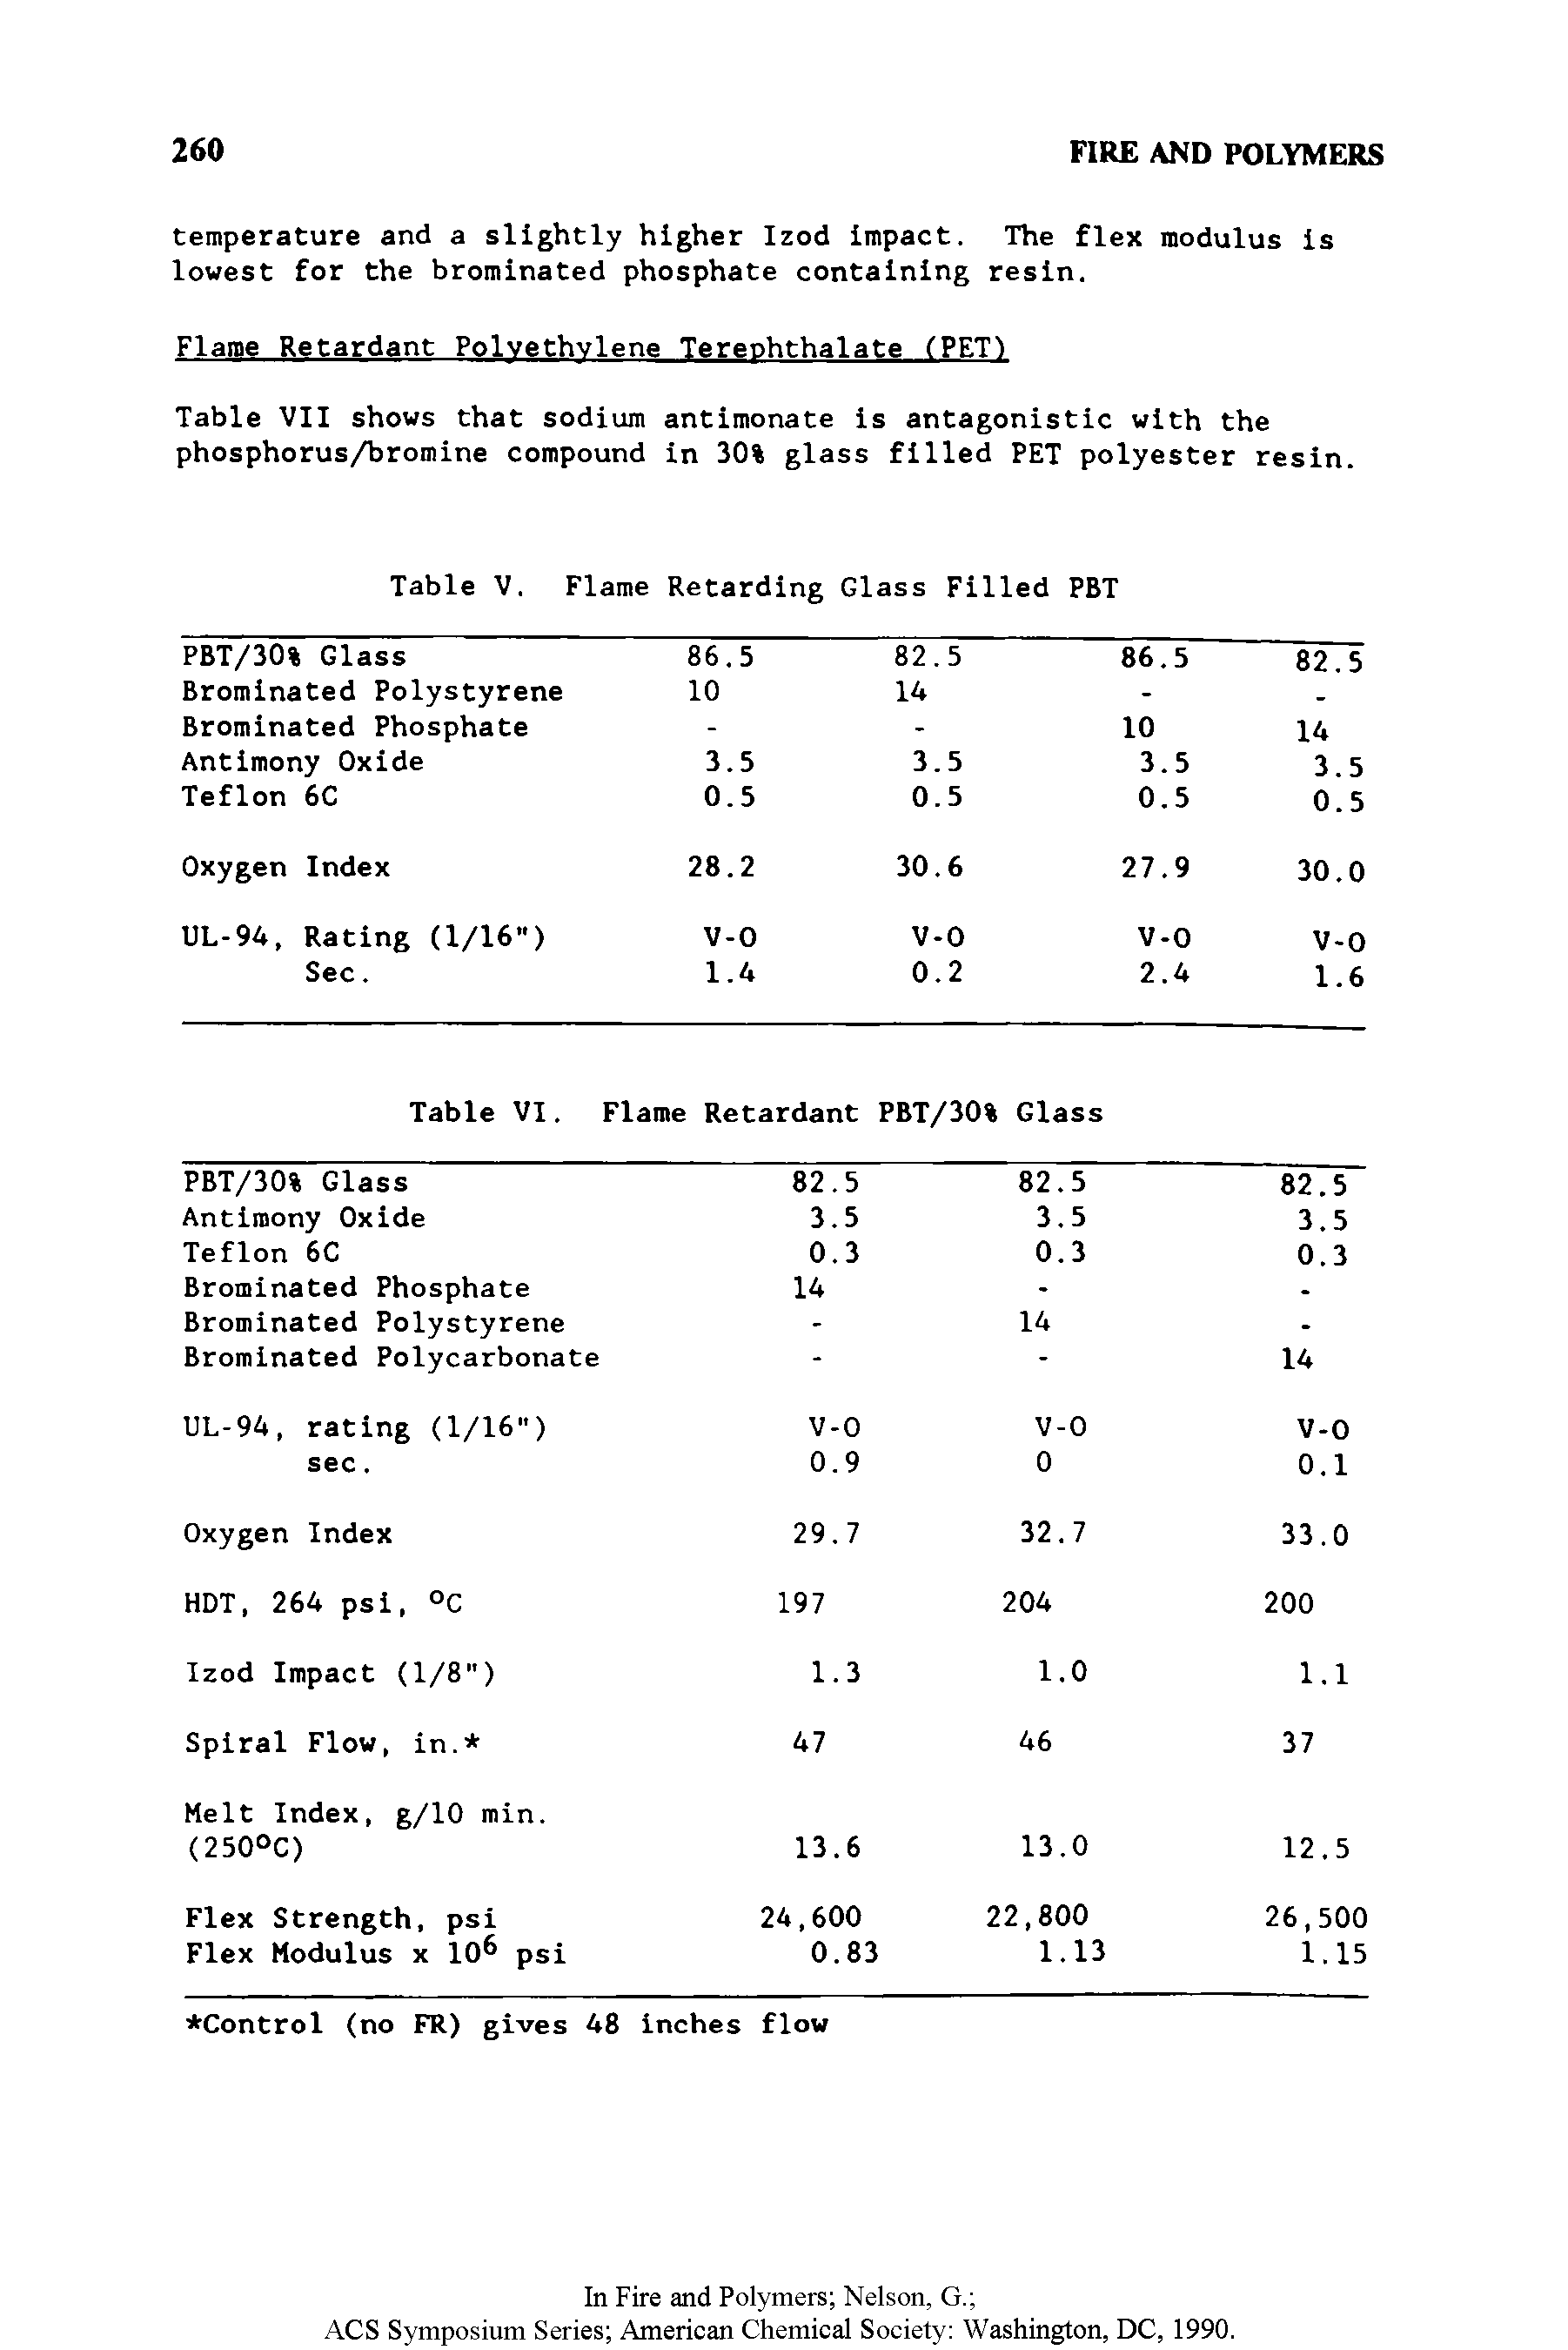 Table VII shows that sodium antimonate is antagonistic with the phosphorus/bromine compound in 30% glass filled PET polyester resin.